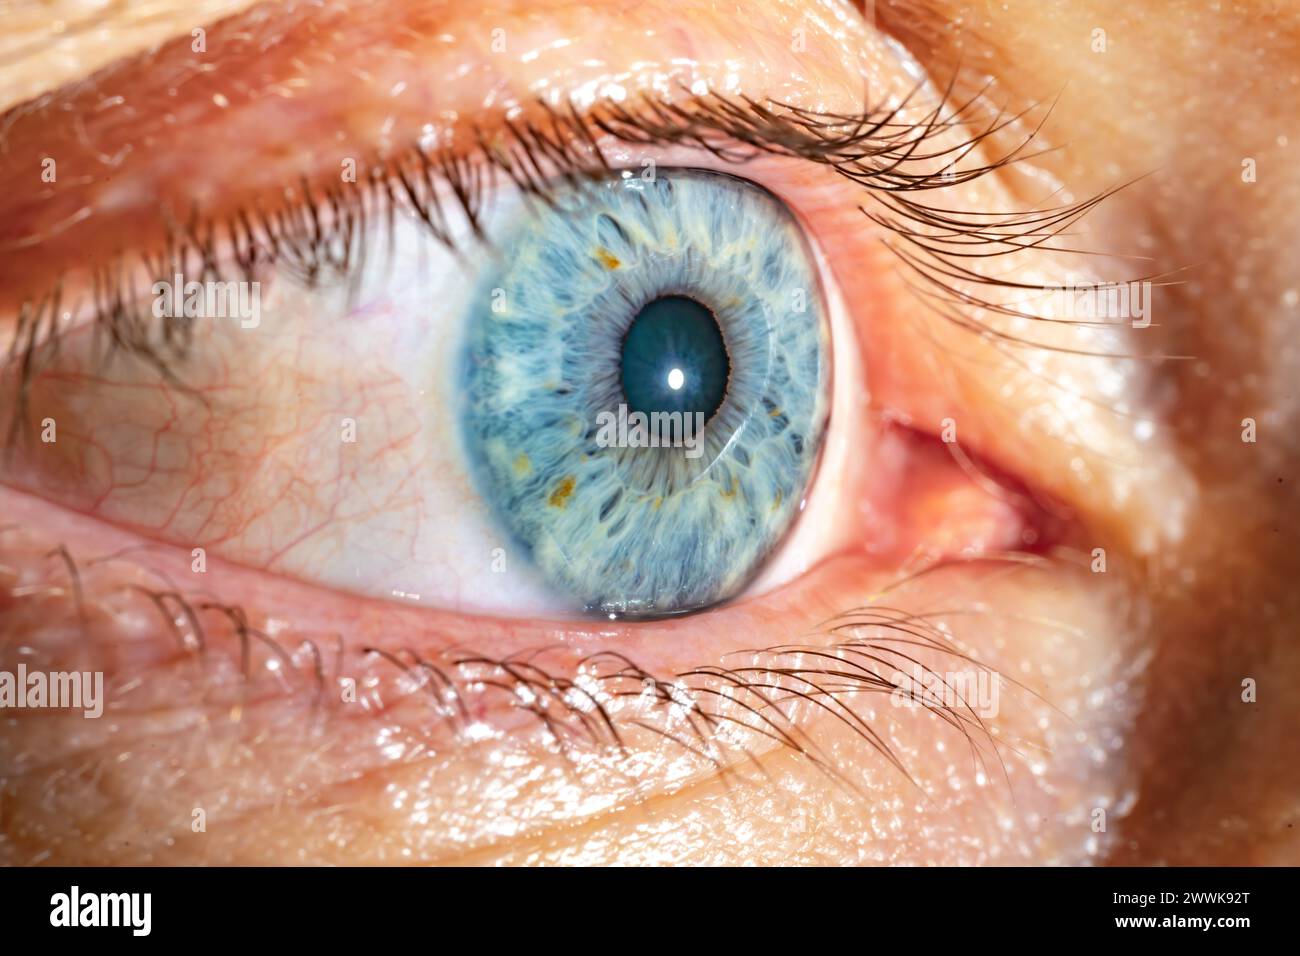 Description: Male Blue Colored Eye With Long Lashes Close Up. Structural Anatomy. Human Iris Macro Detail. Stock Photo